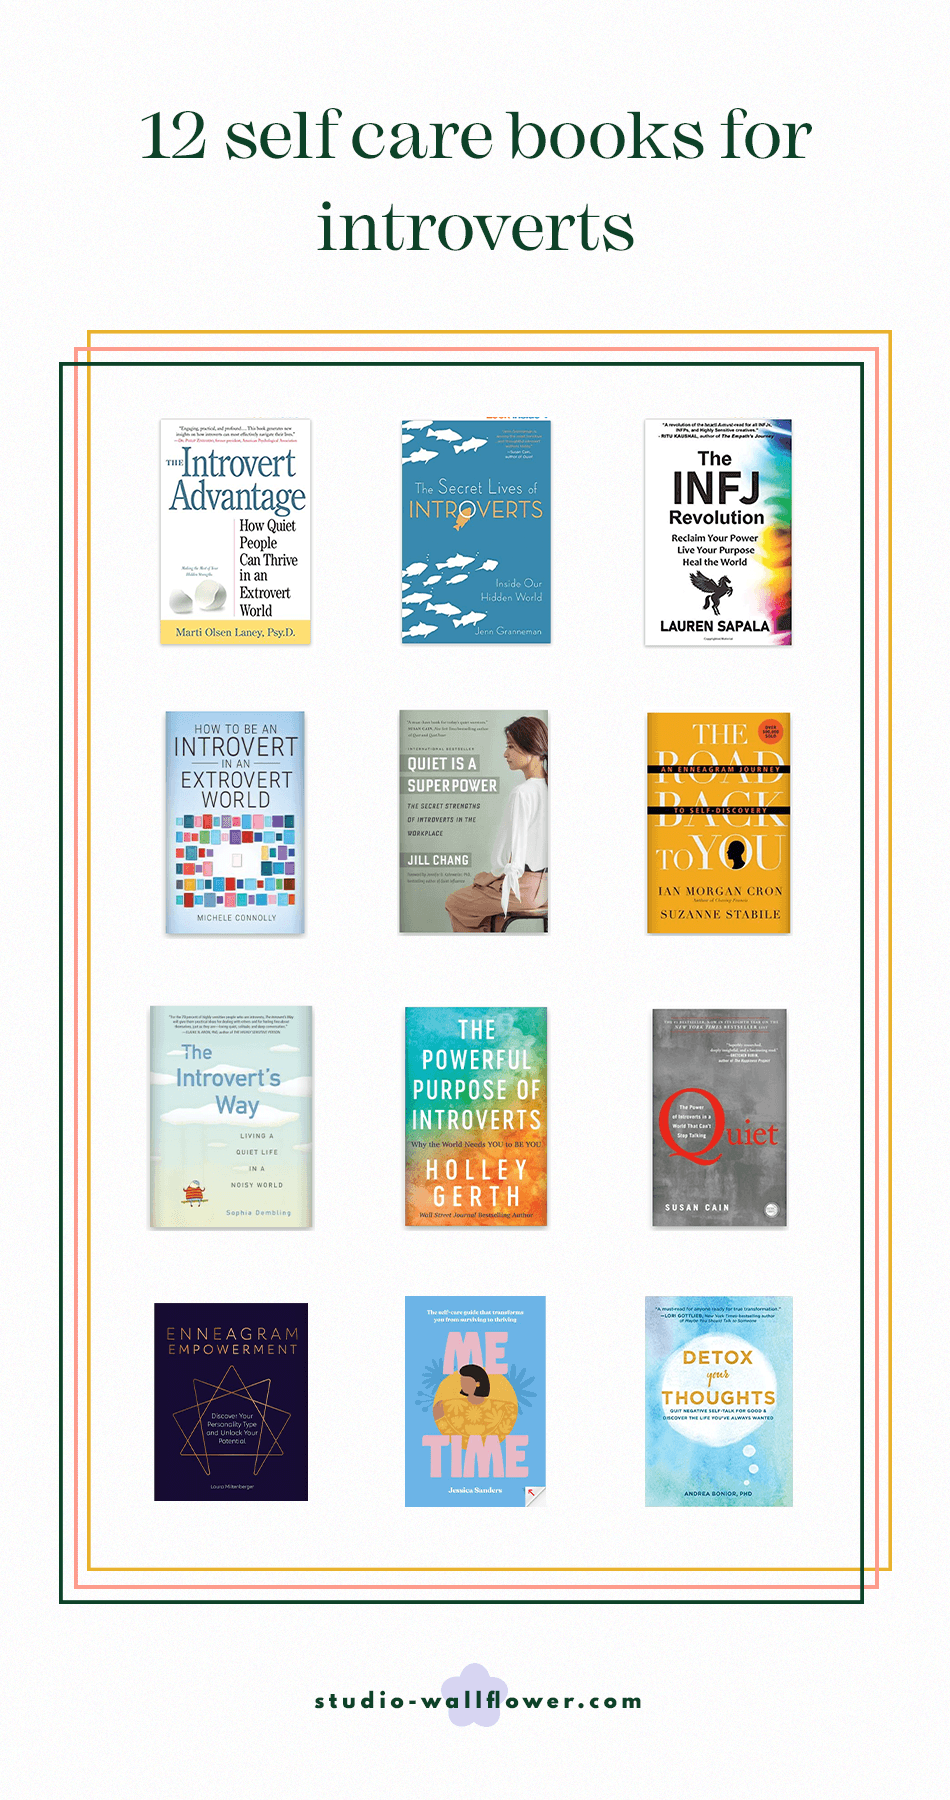 12 Self Care Books for Introverts via wallflower